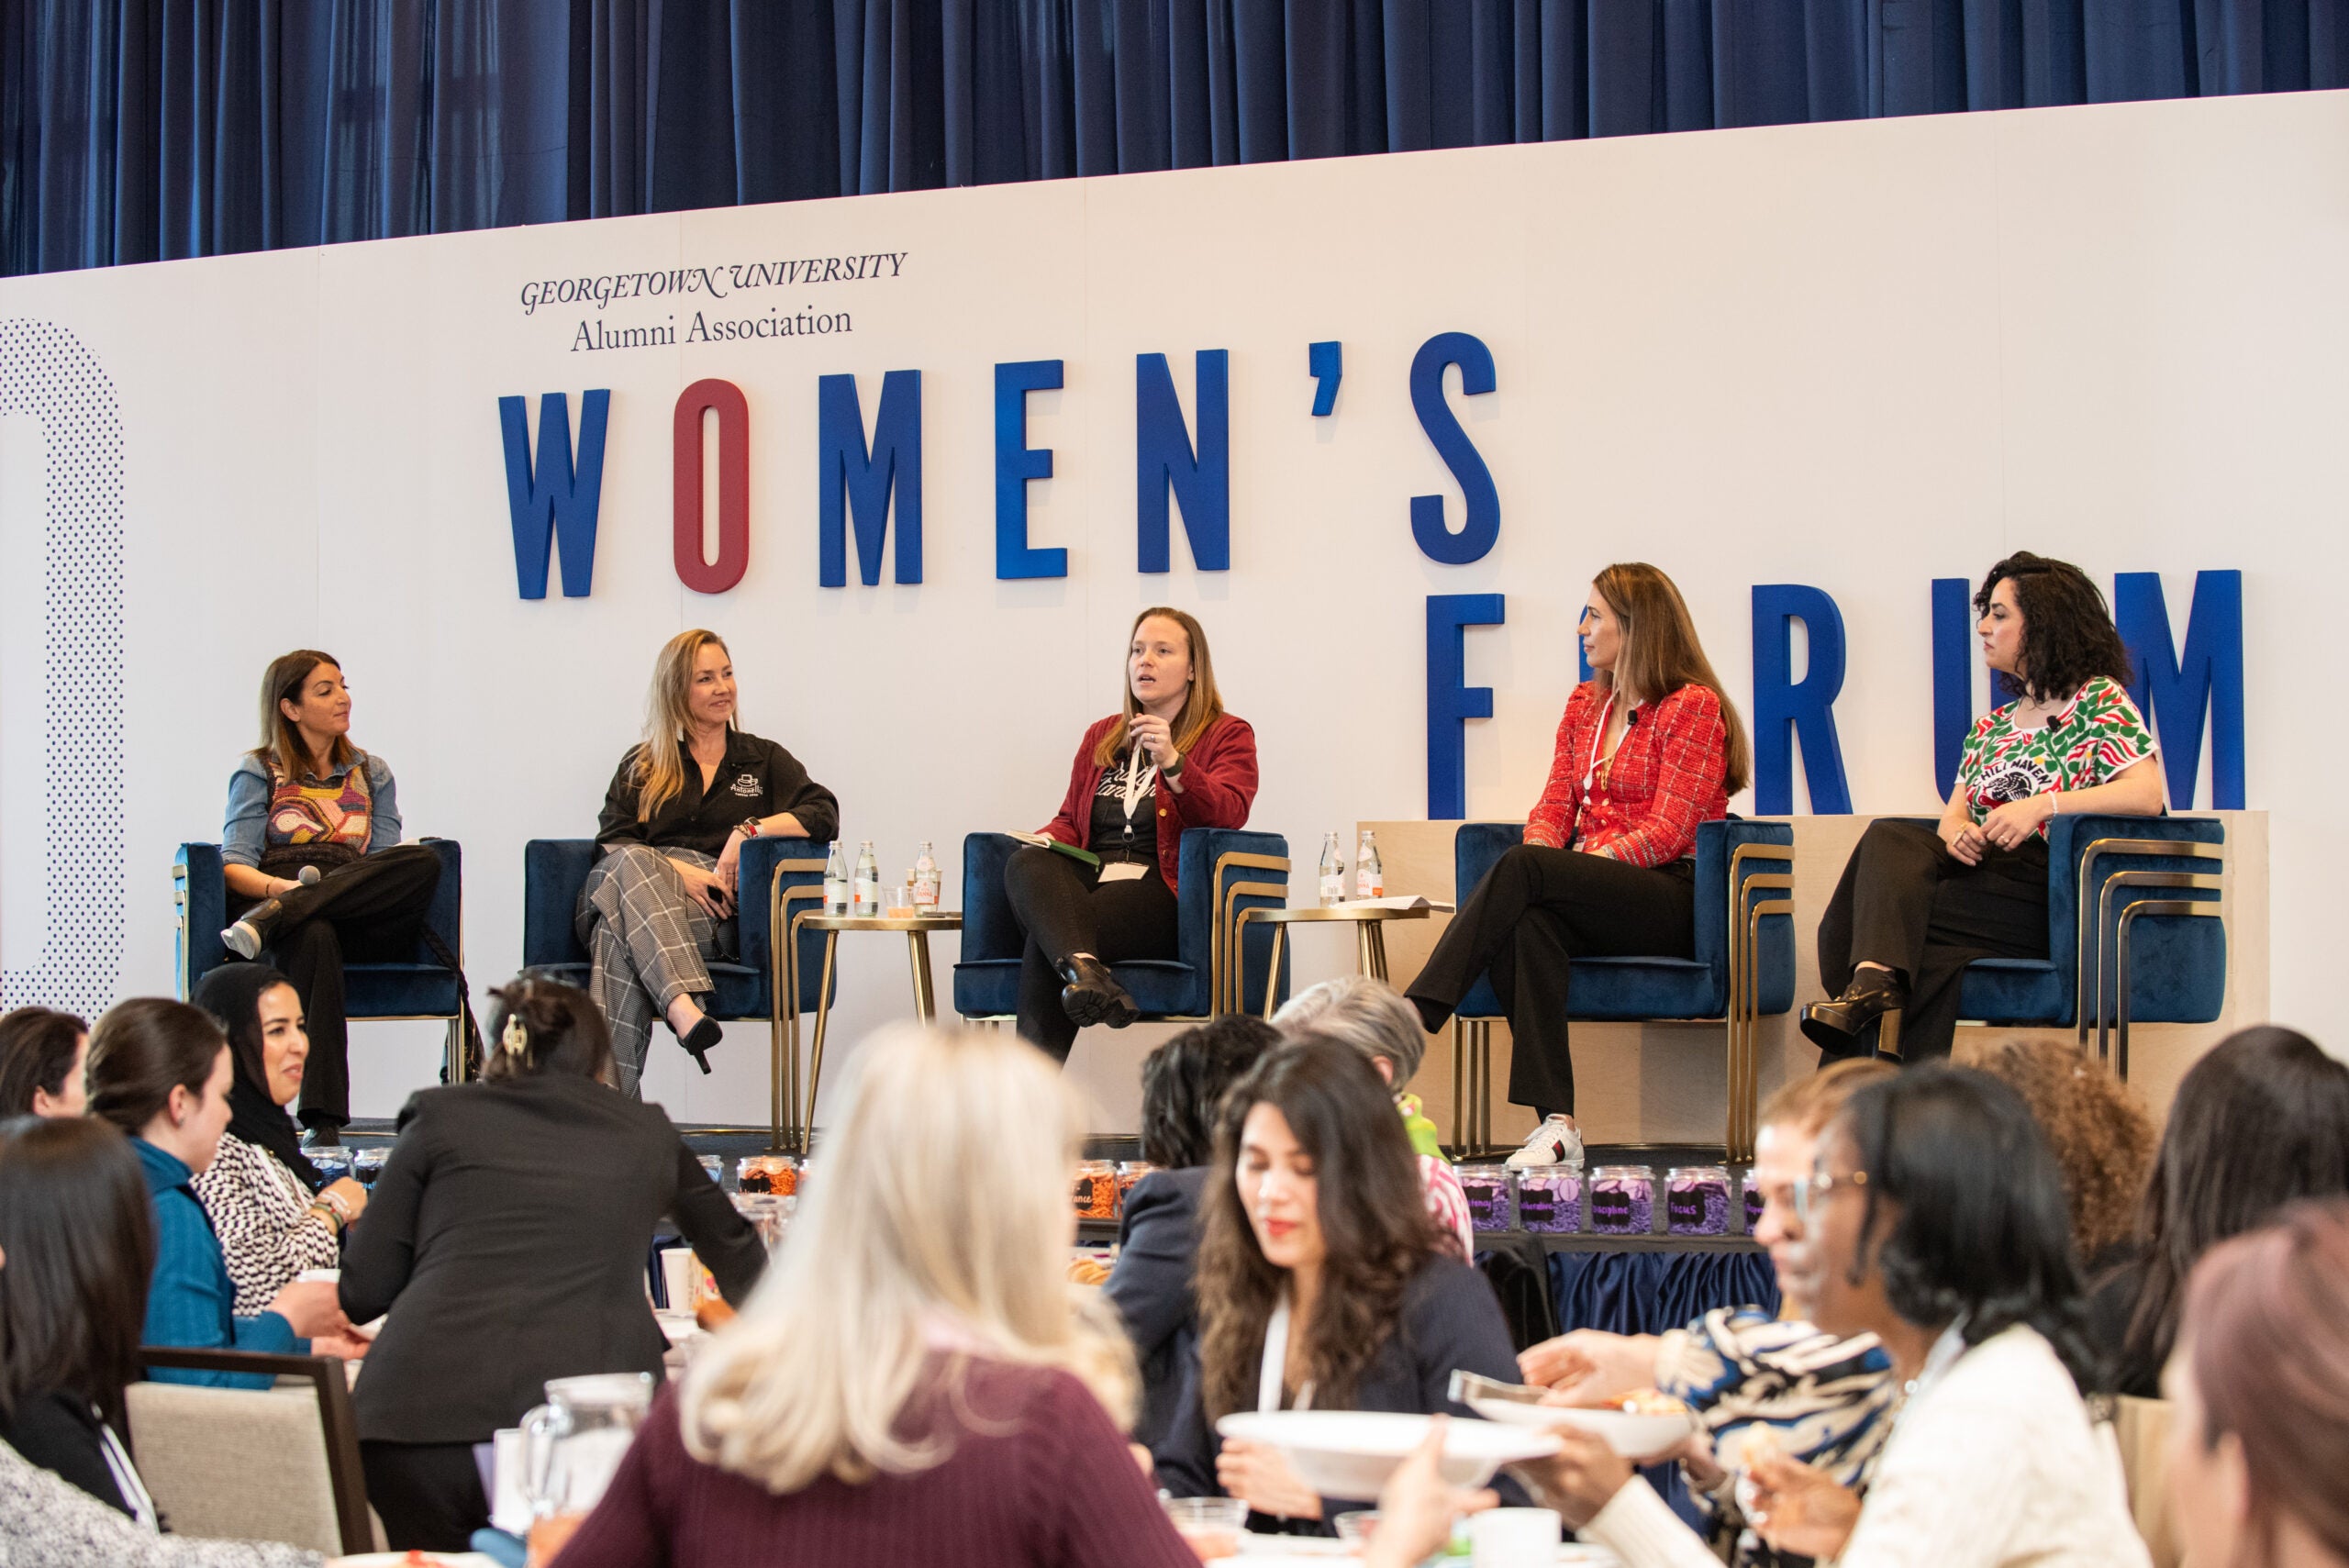 women sit on a stage in front of a crowd, and a background behind them that says "women's forum"